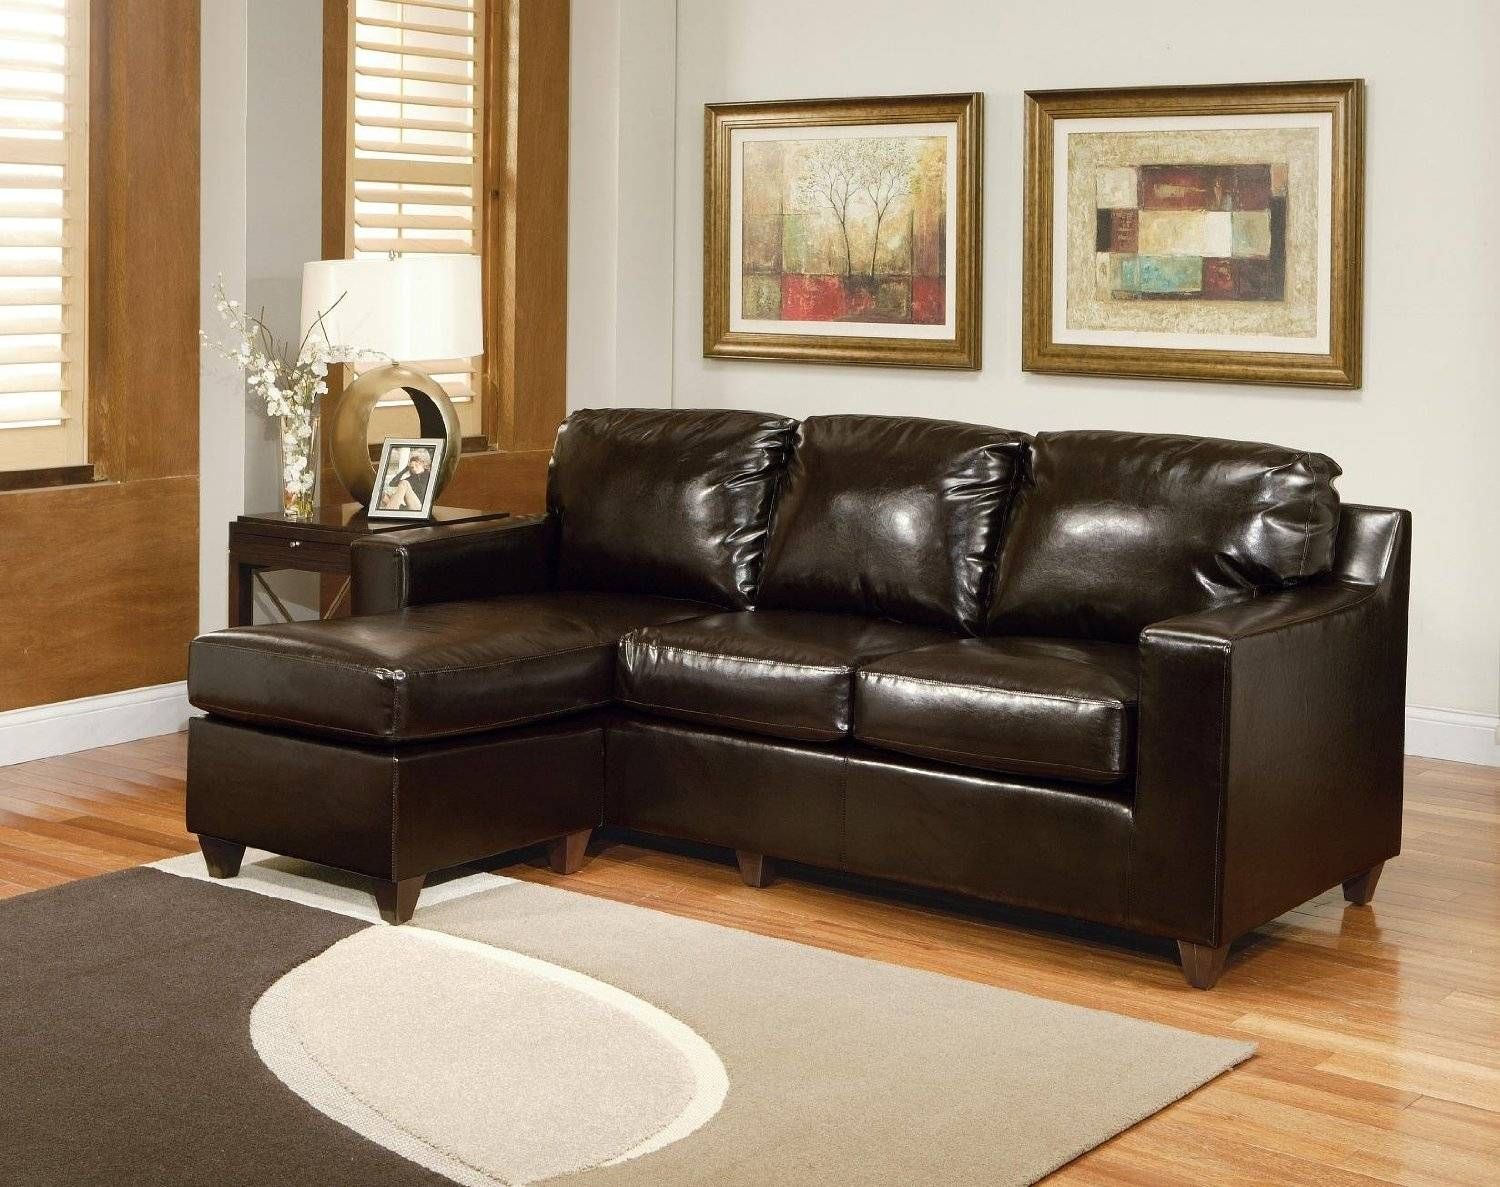 Leather Sectional Sofa Colorado Springs | Centerfieldbar For Small Black Sofas (View 13 of 15)